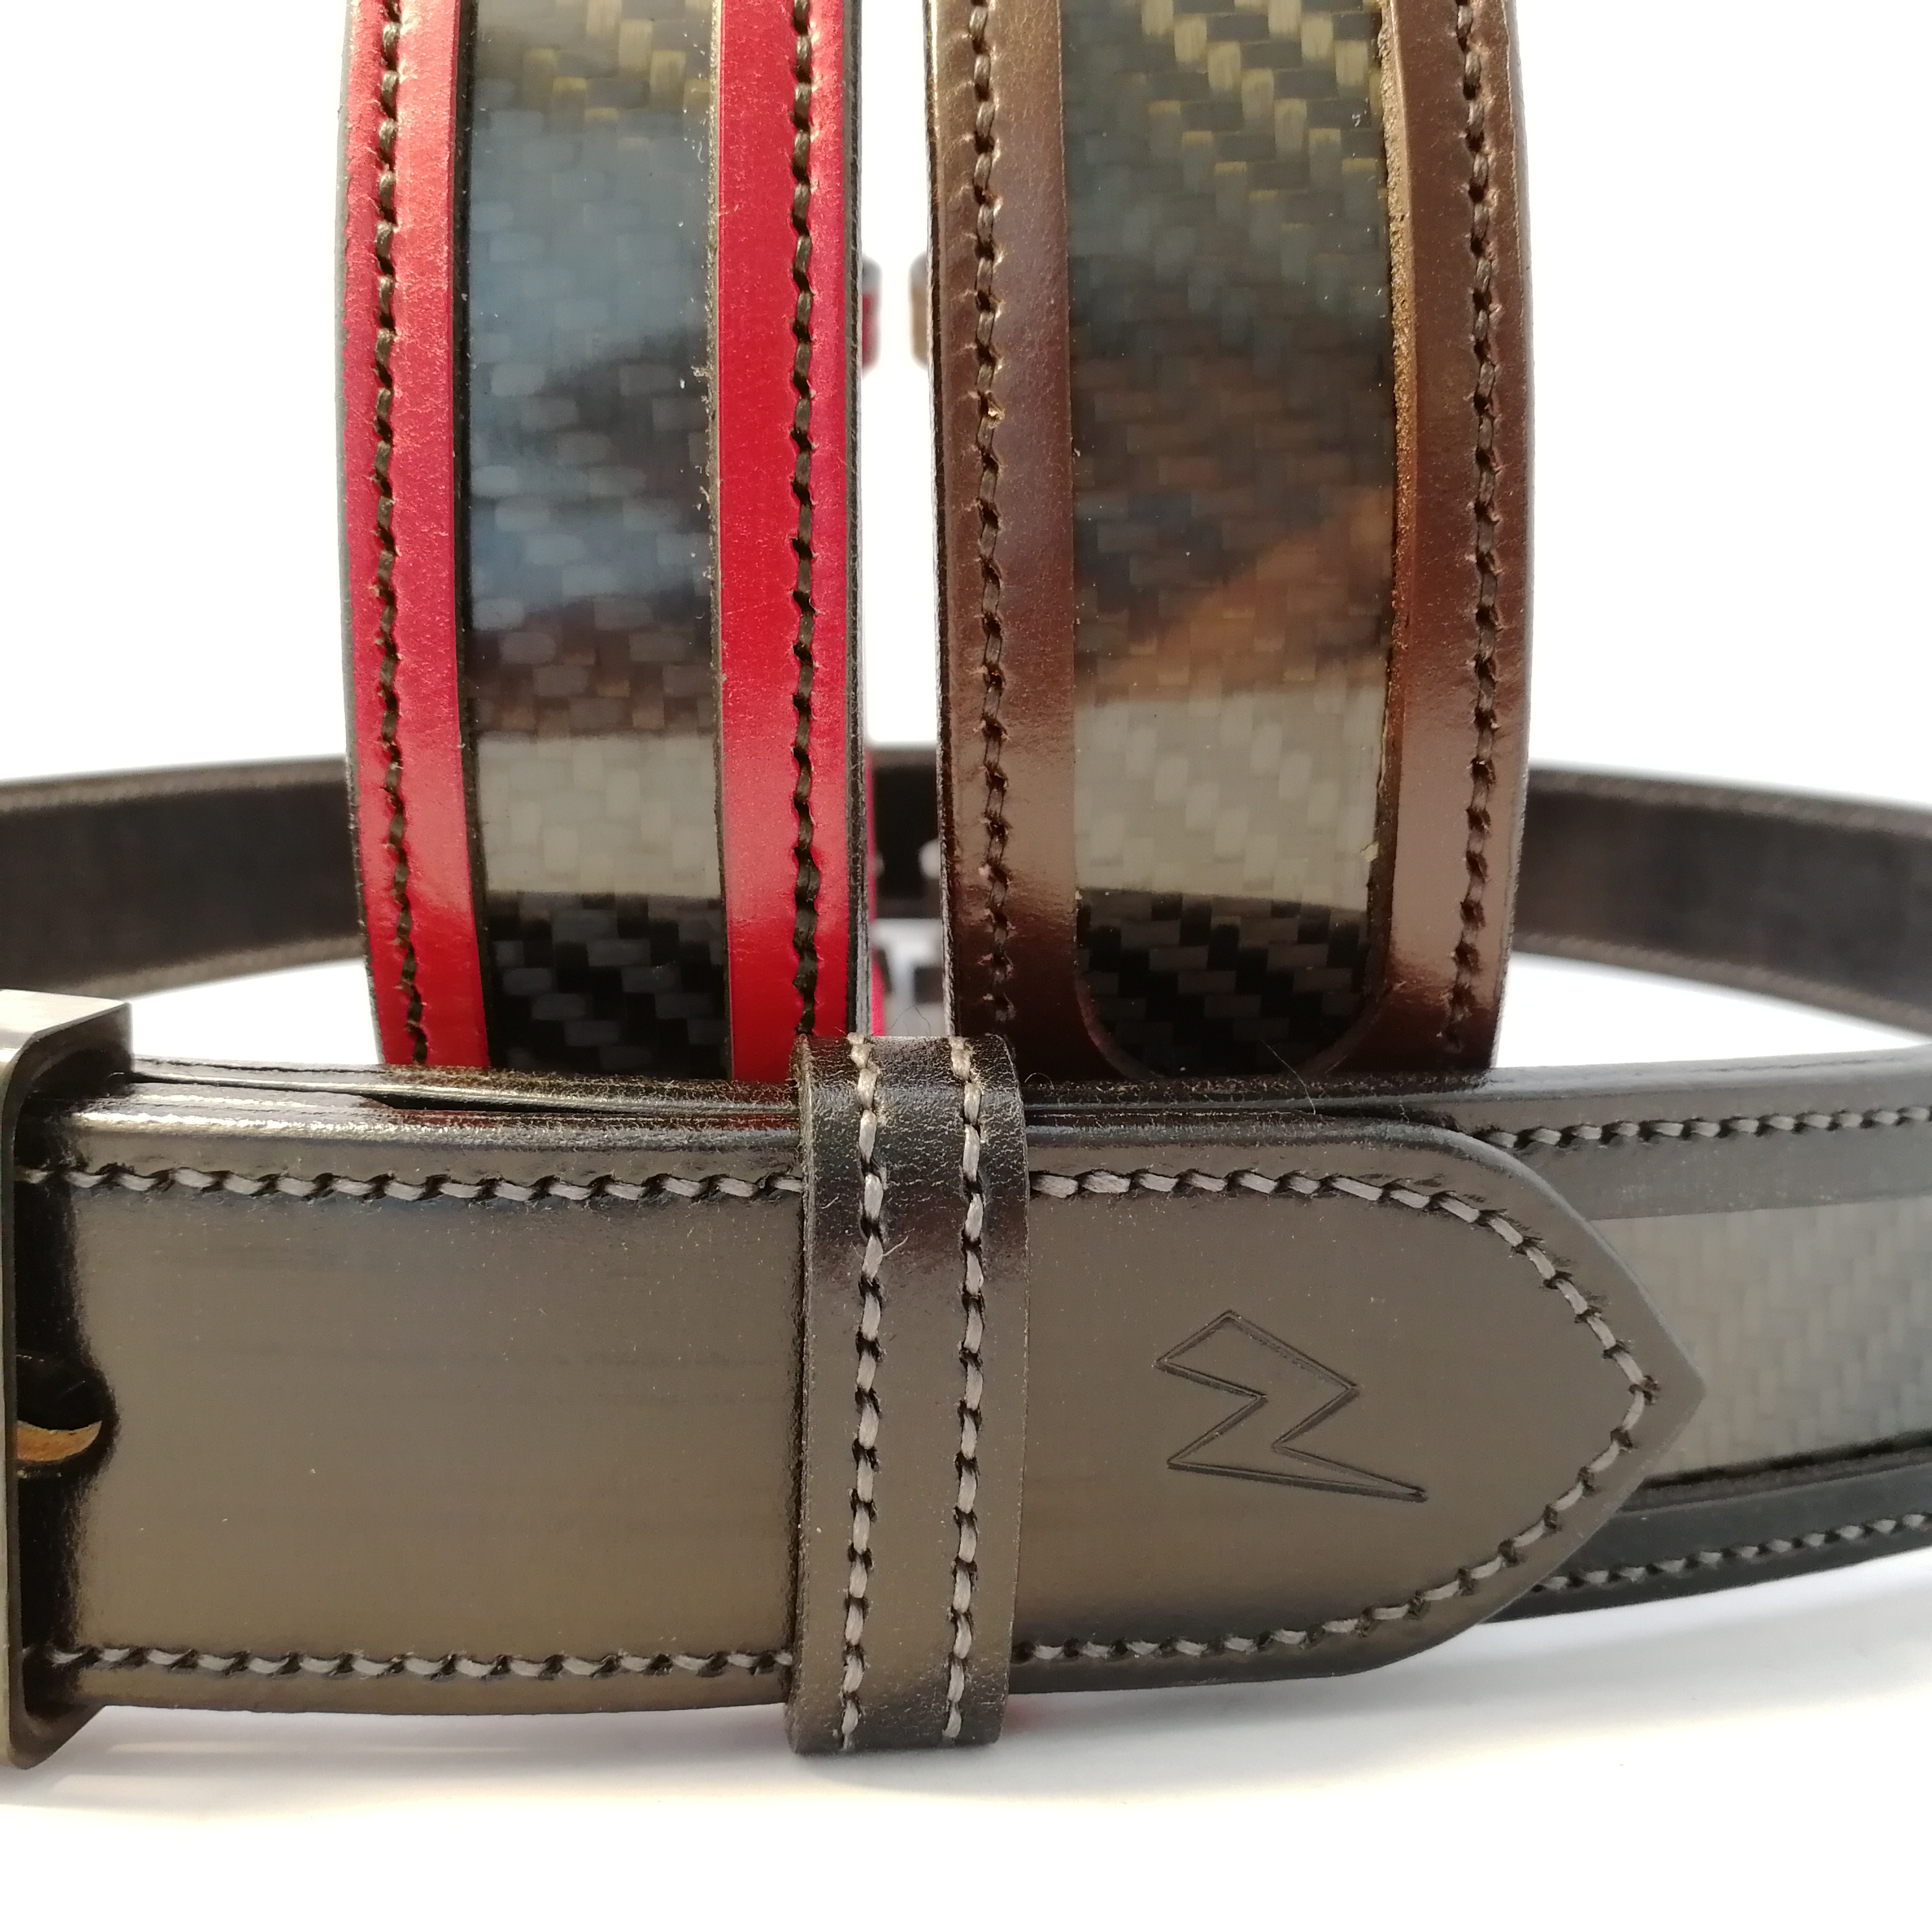 ZEEK® and TBM's Carbon Fibre and Leather Belts